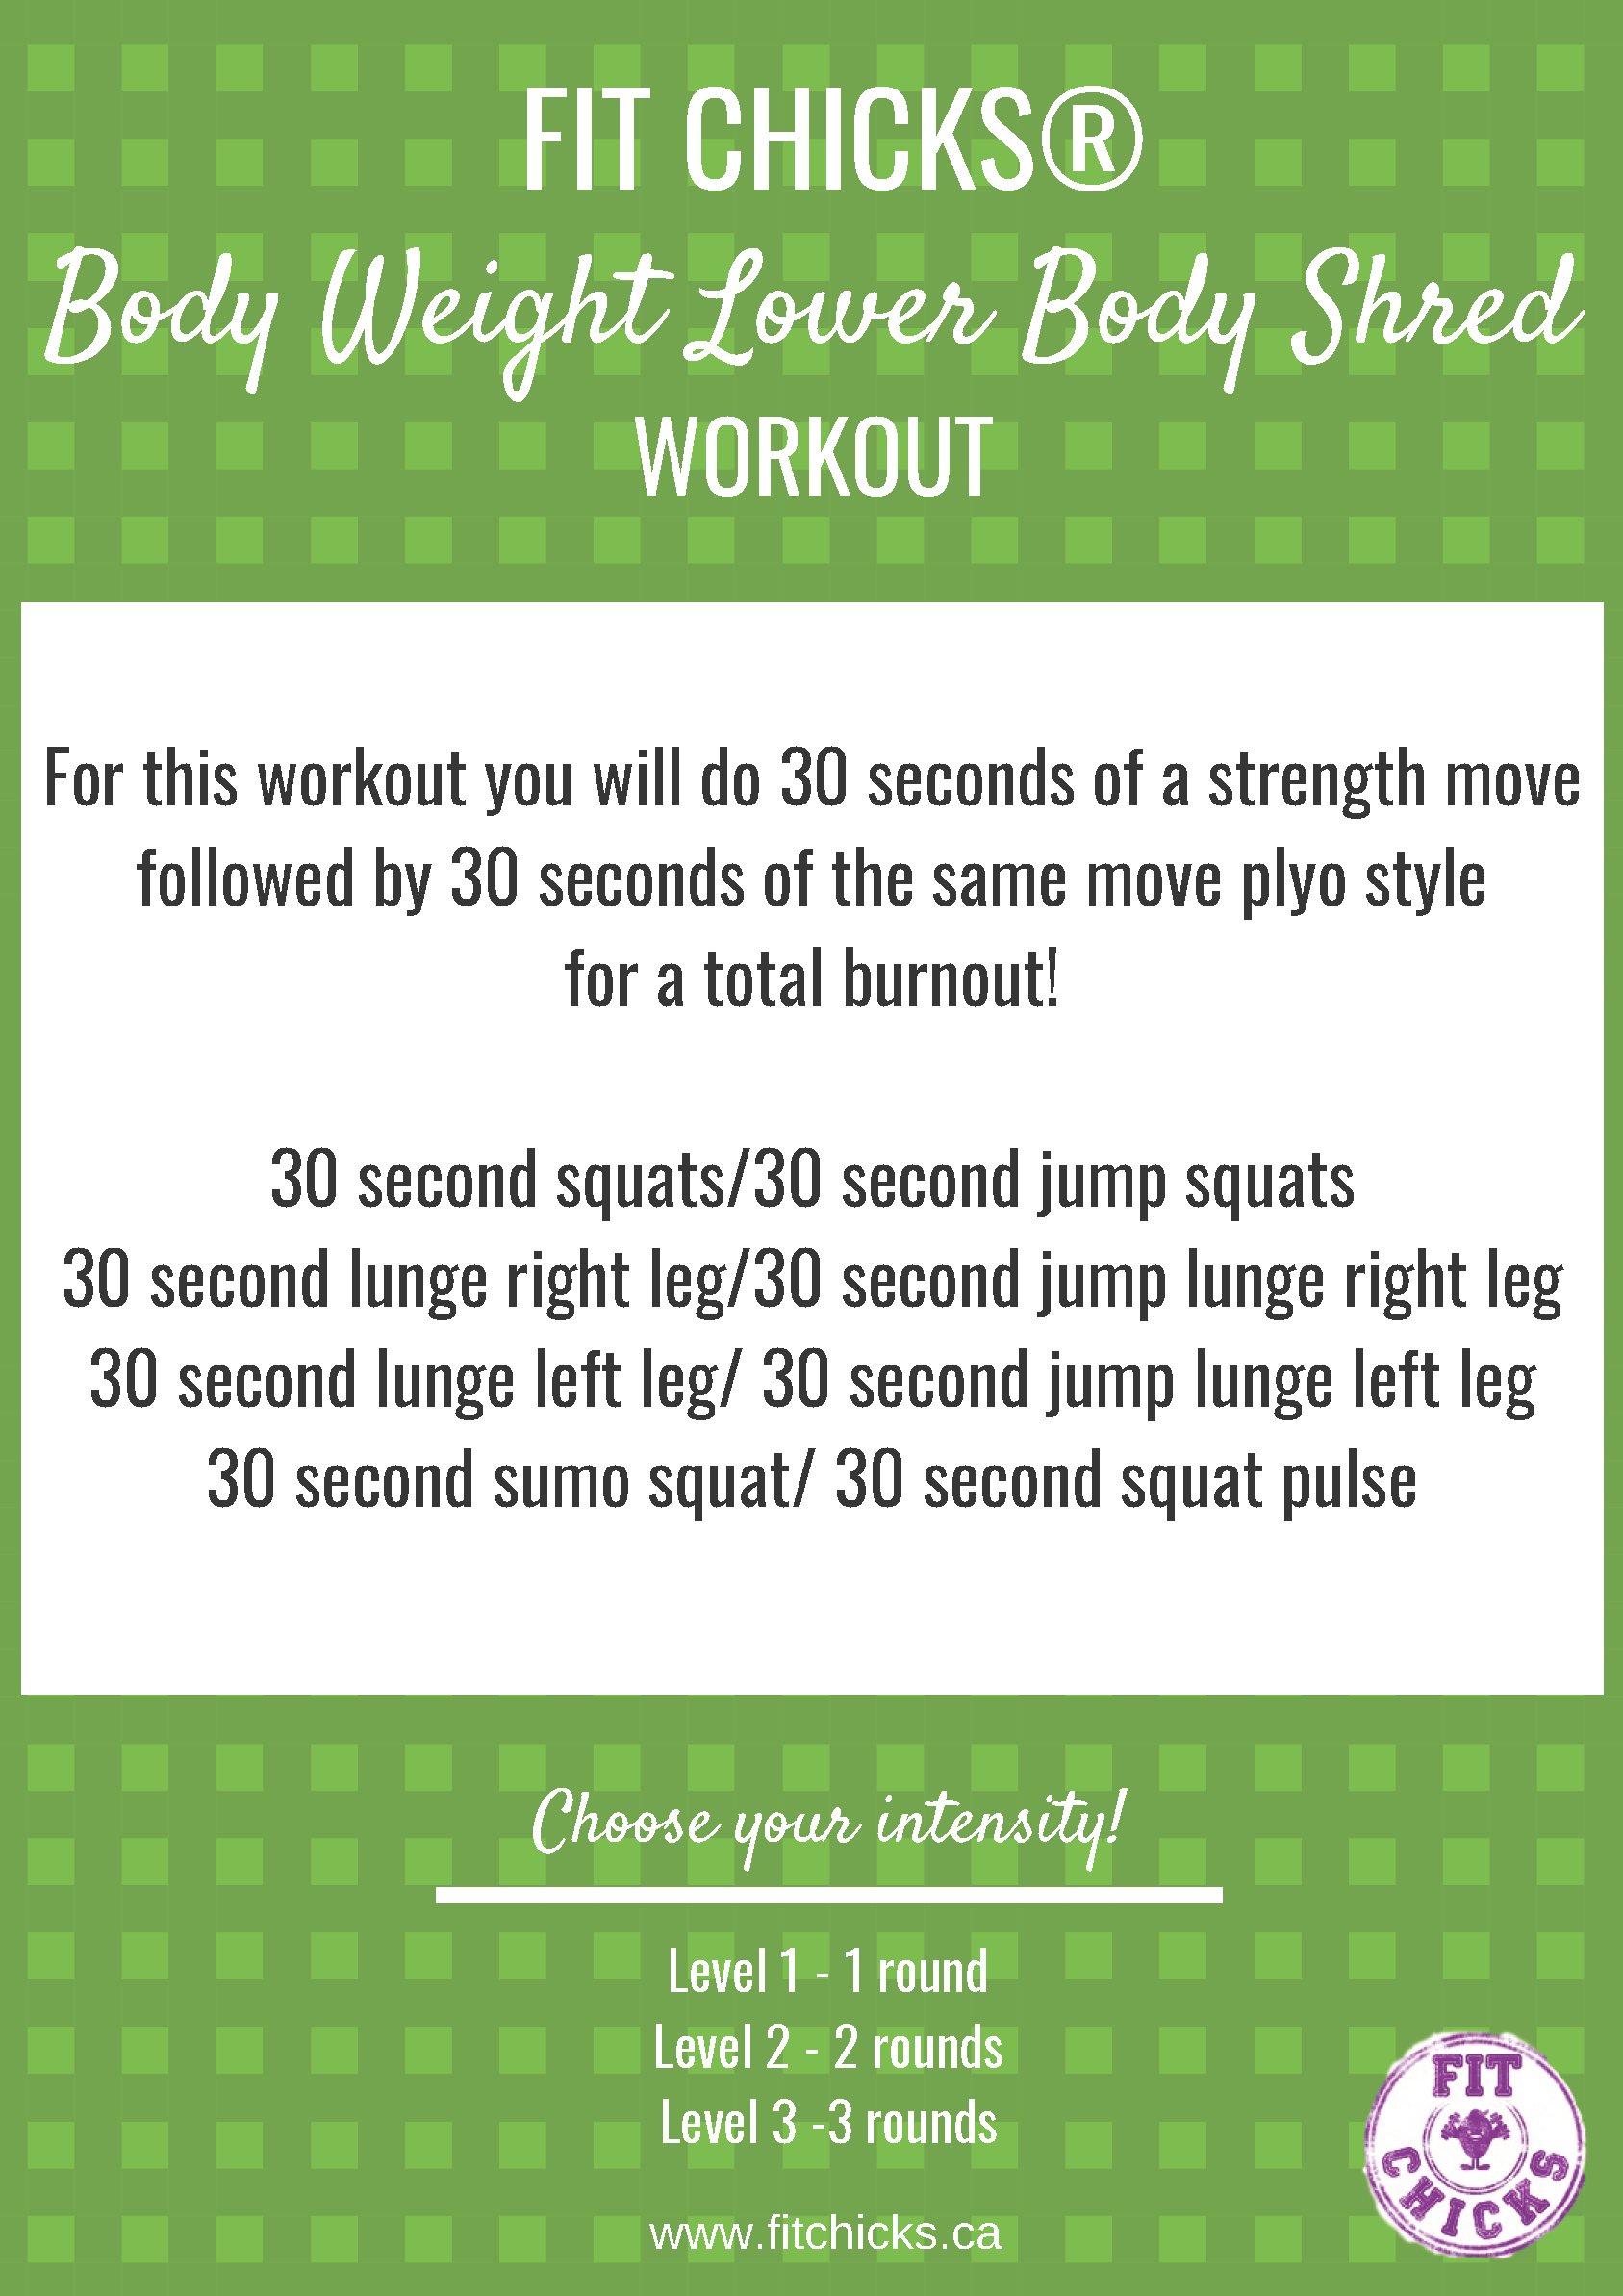 FIT CHICKS Friday Lower Body Shred HIIT Workout — FIT CHICKS BLOG